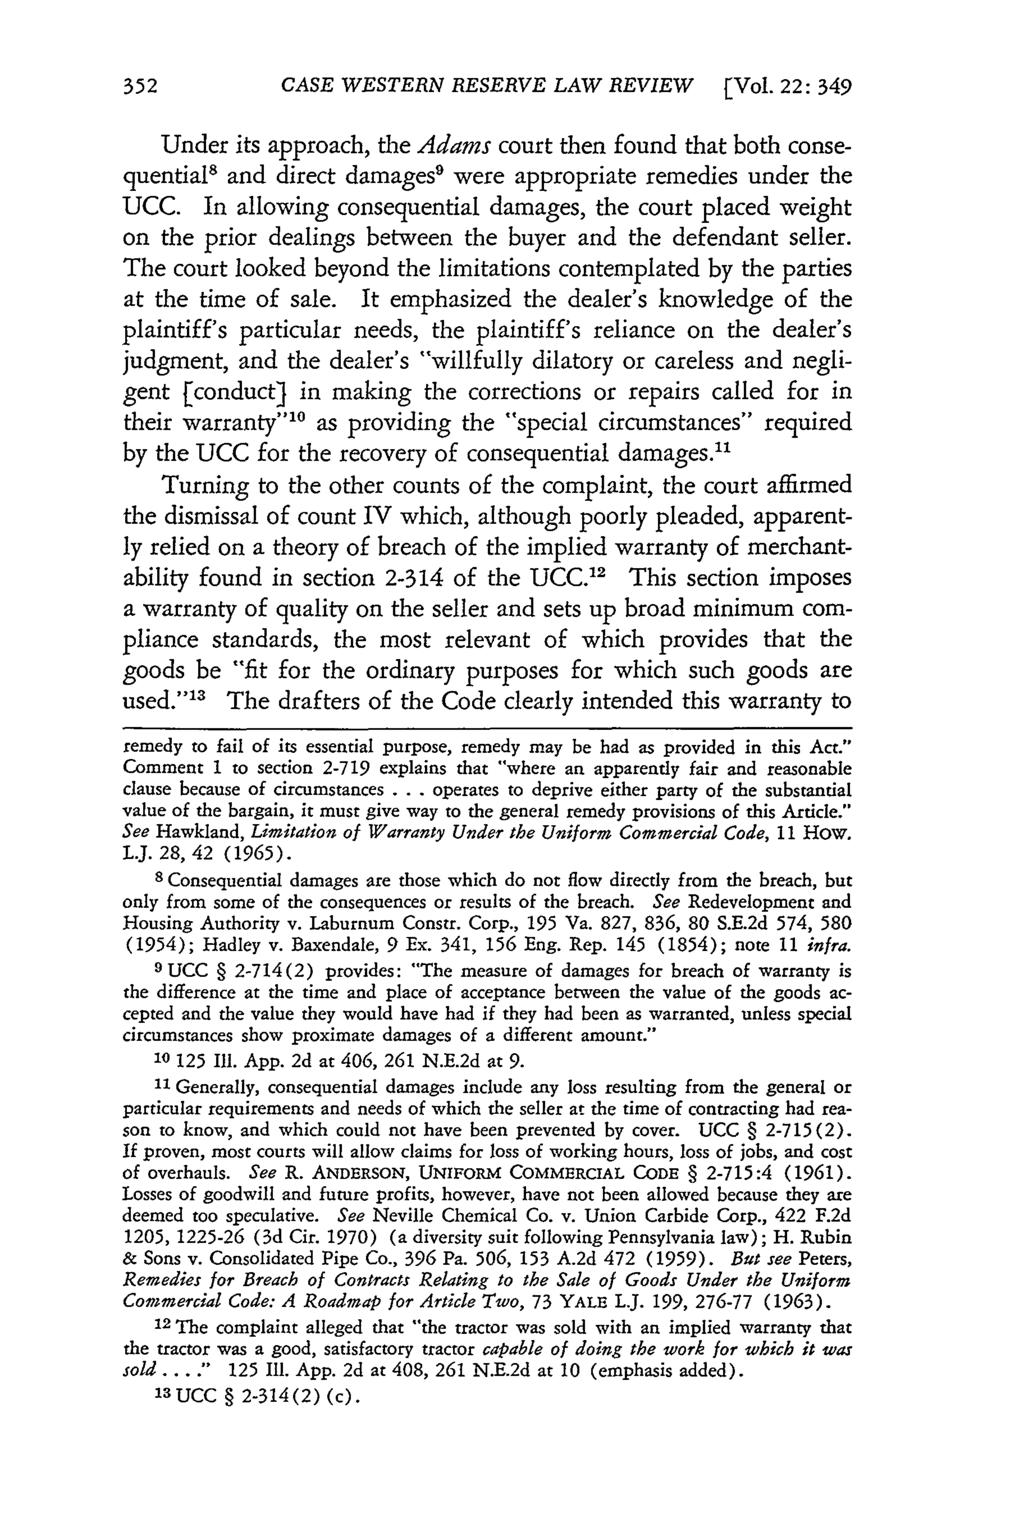 CASE WESTERN RESERVE LAW REVIEW [Vol. 22: 349 Under its approach, the Adams court then found that both consequential' and direct damages 9 were appropriate remedies under the UCC.